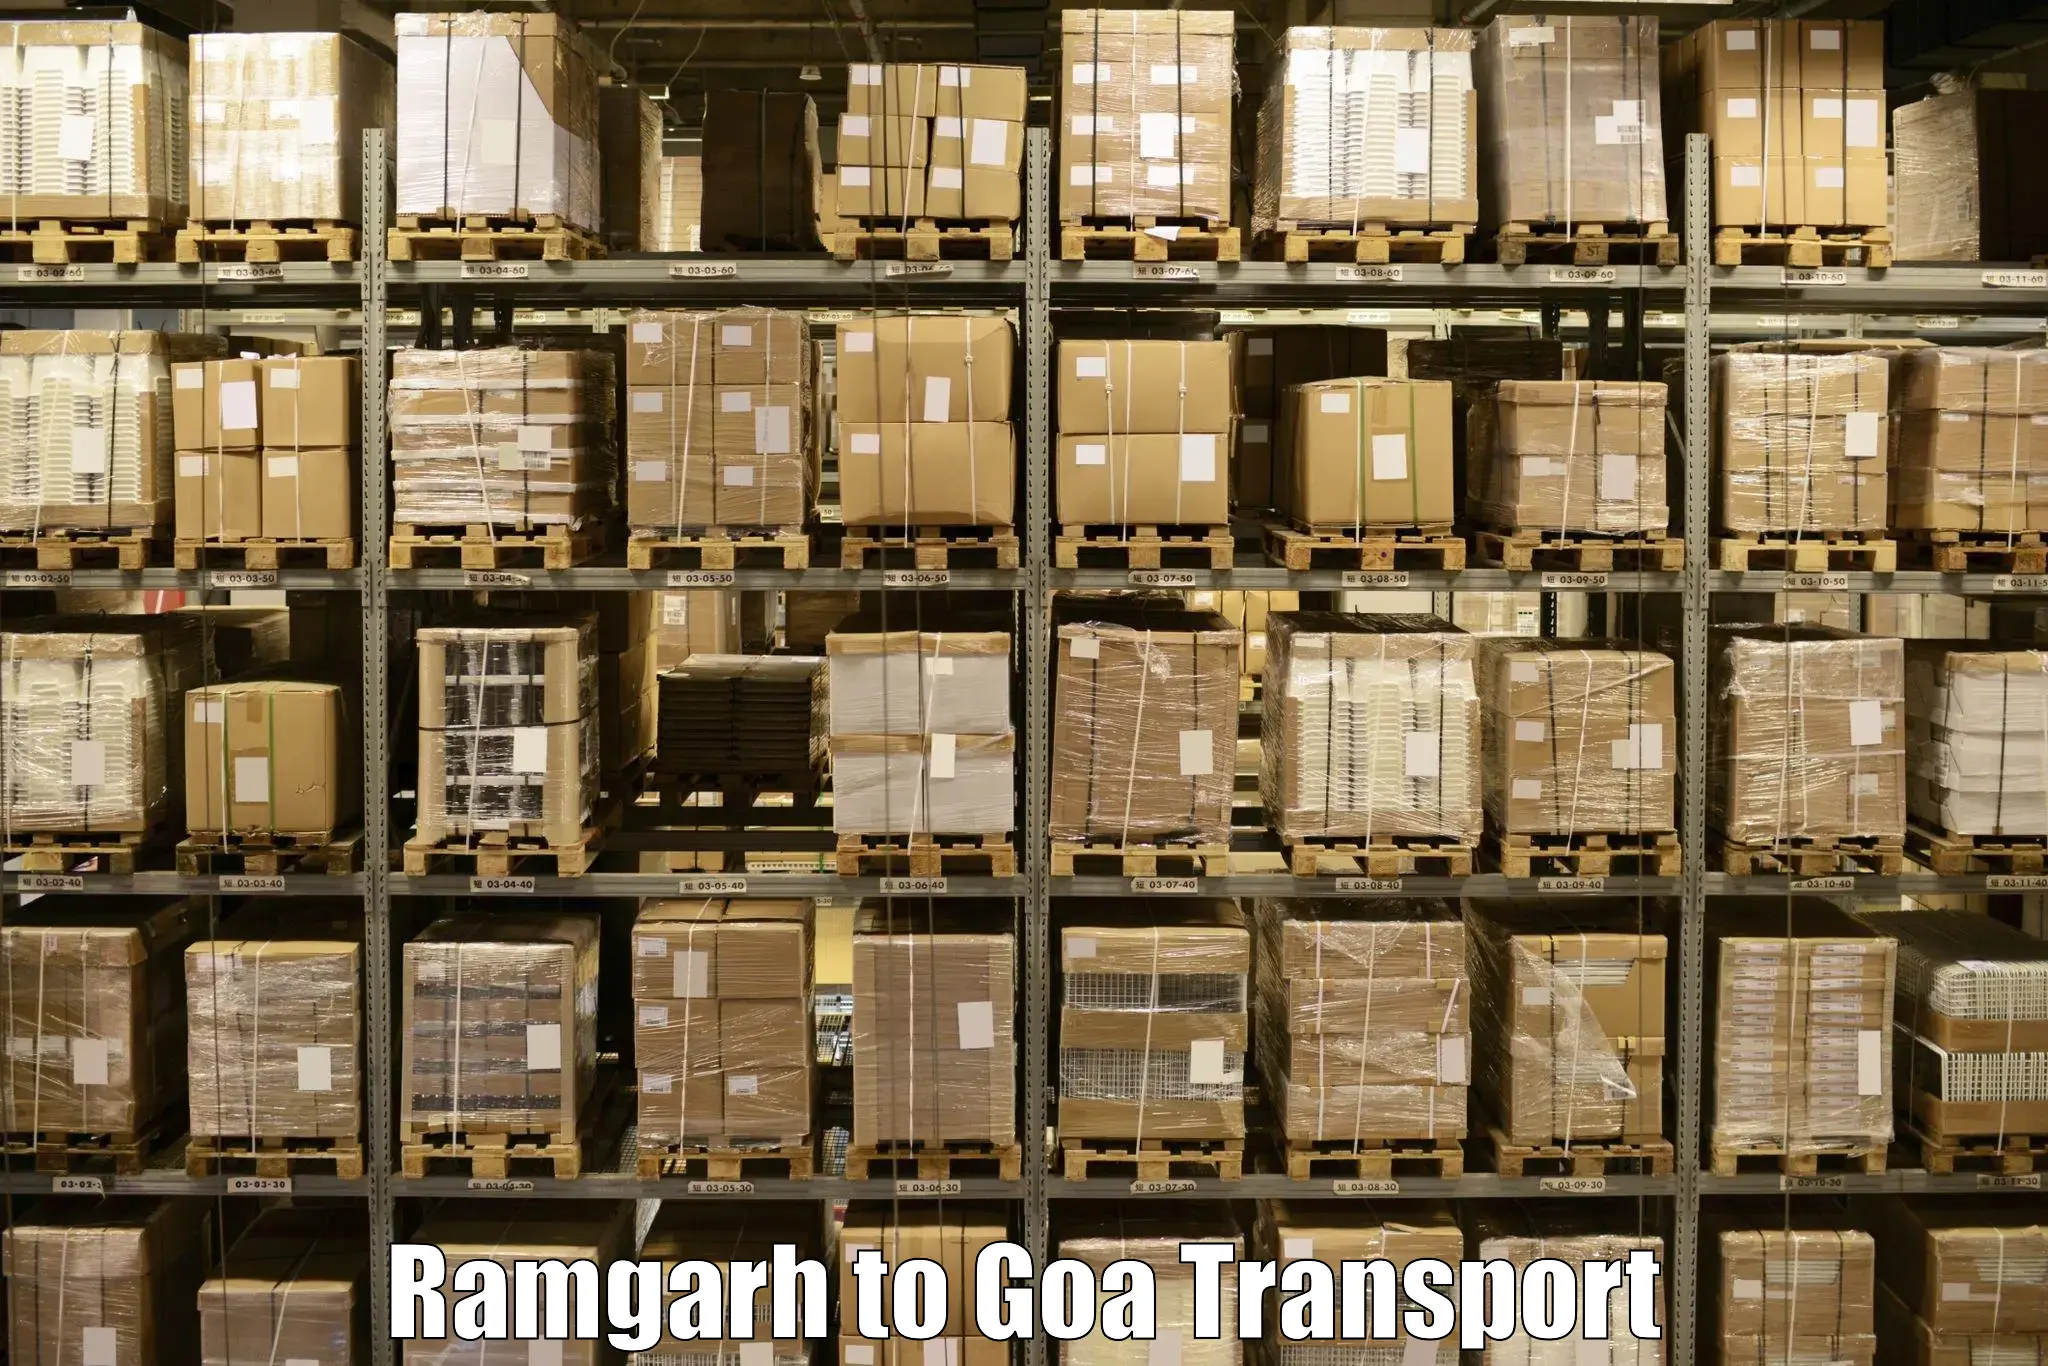 Container transport service Ramgarh to Panjim